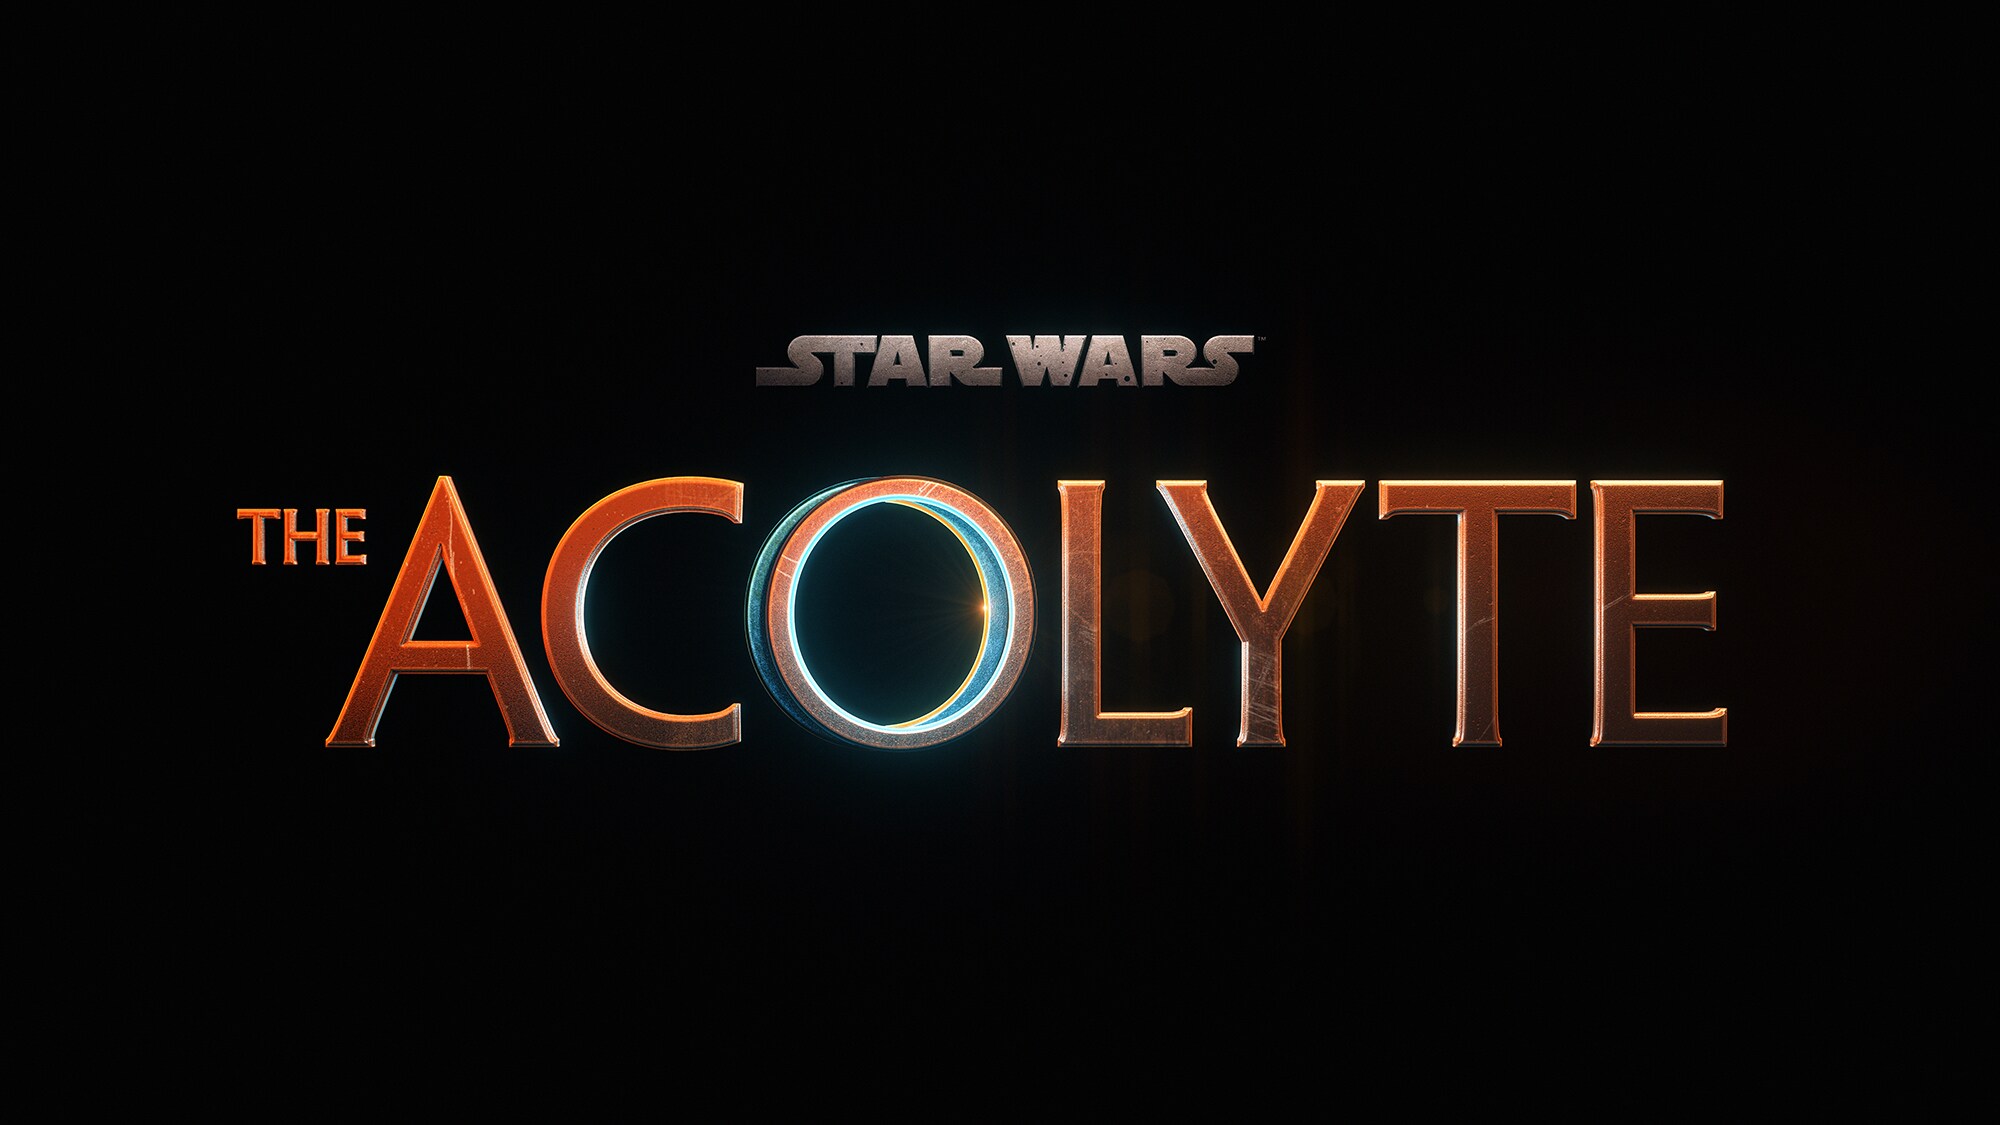 Disney+ Shares Photos from “The Acolyte” Special Screening Event in New York